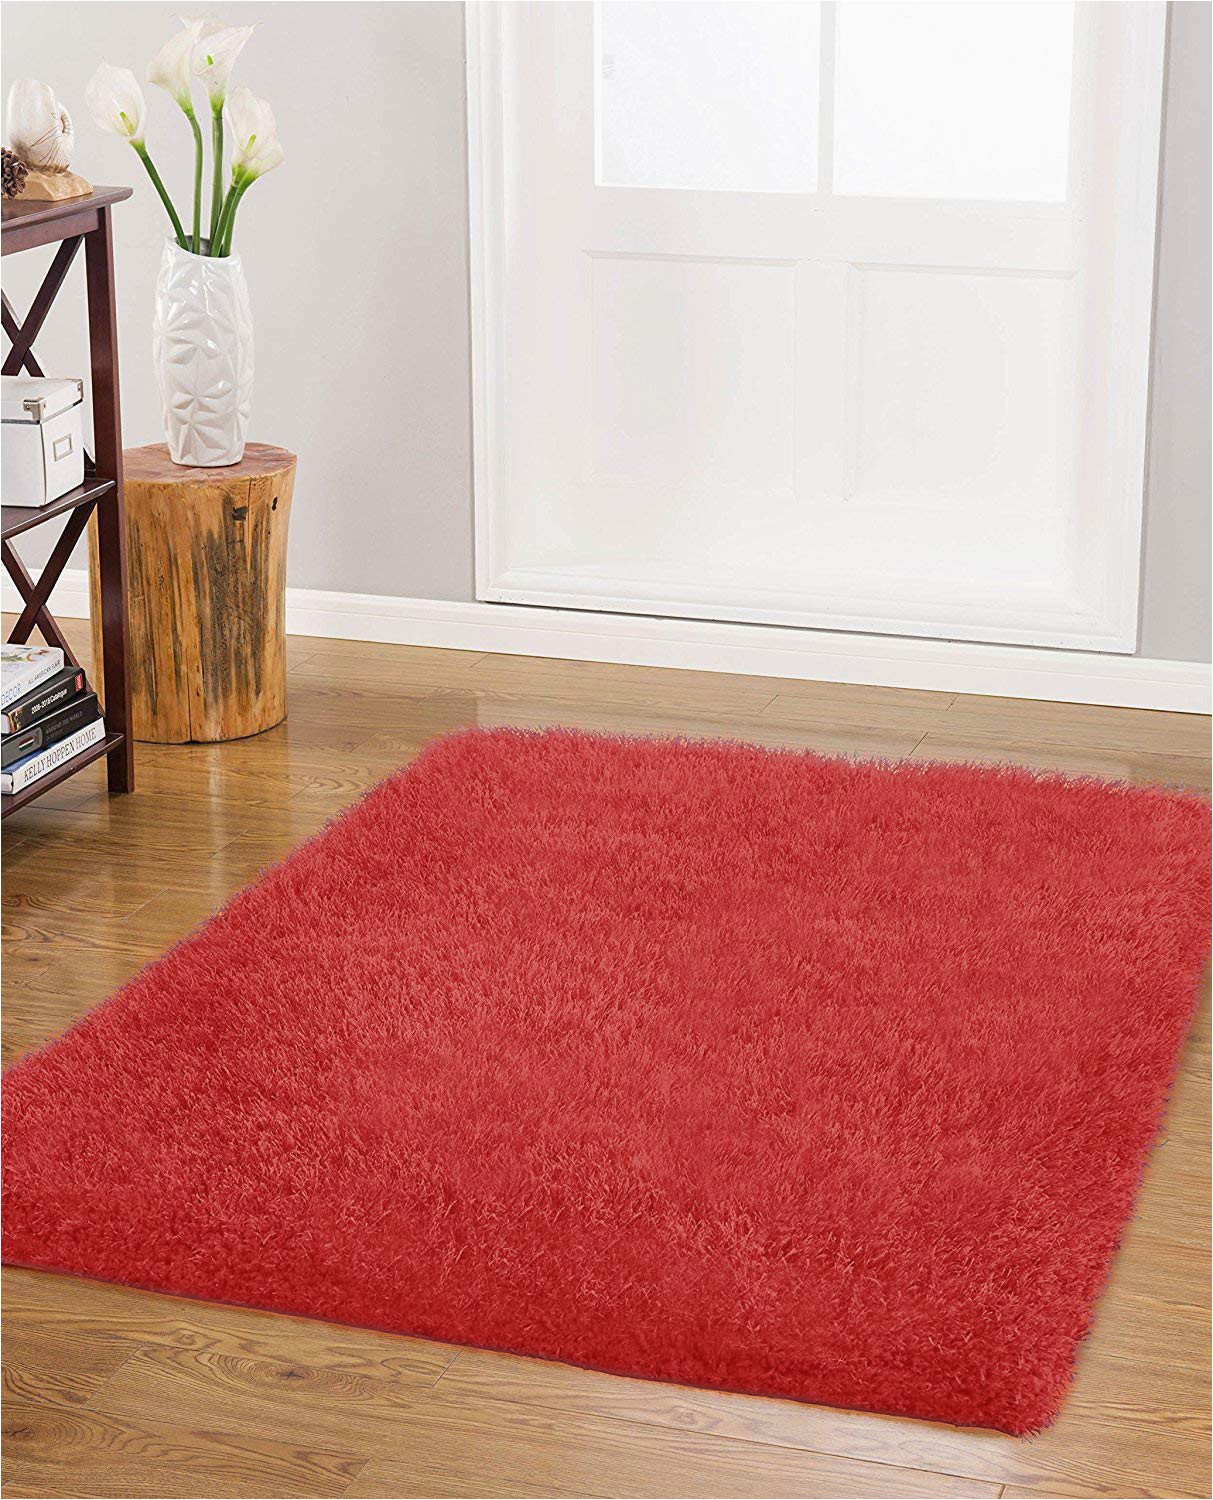 Plush Red Bathroom Rugs Buy Nothing Beyond Claudia Plush Shag Bath ascent Rug Color